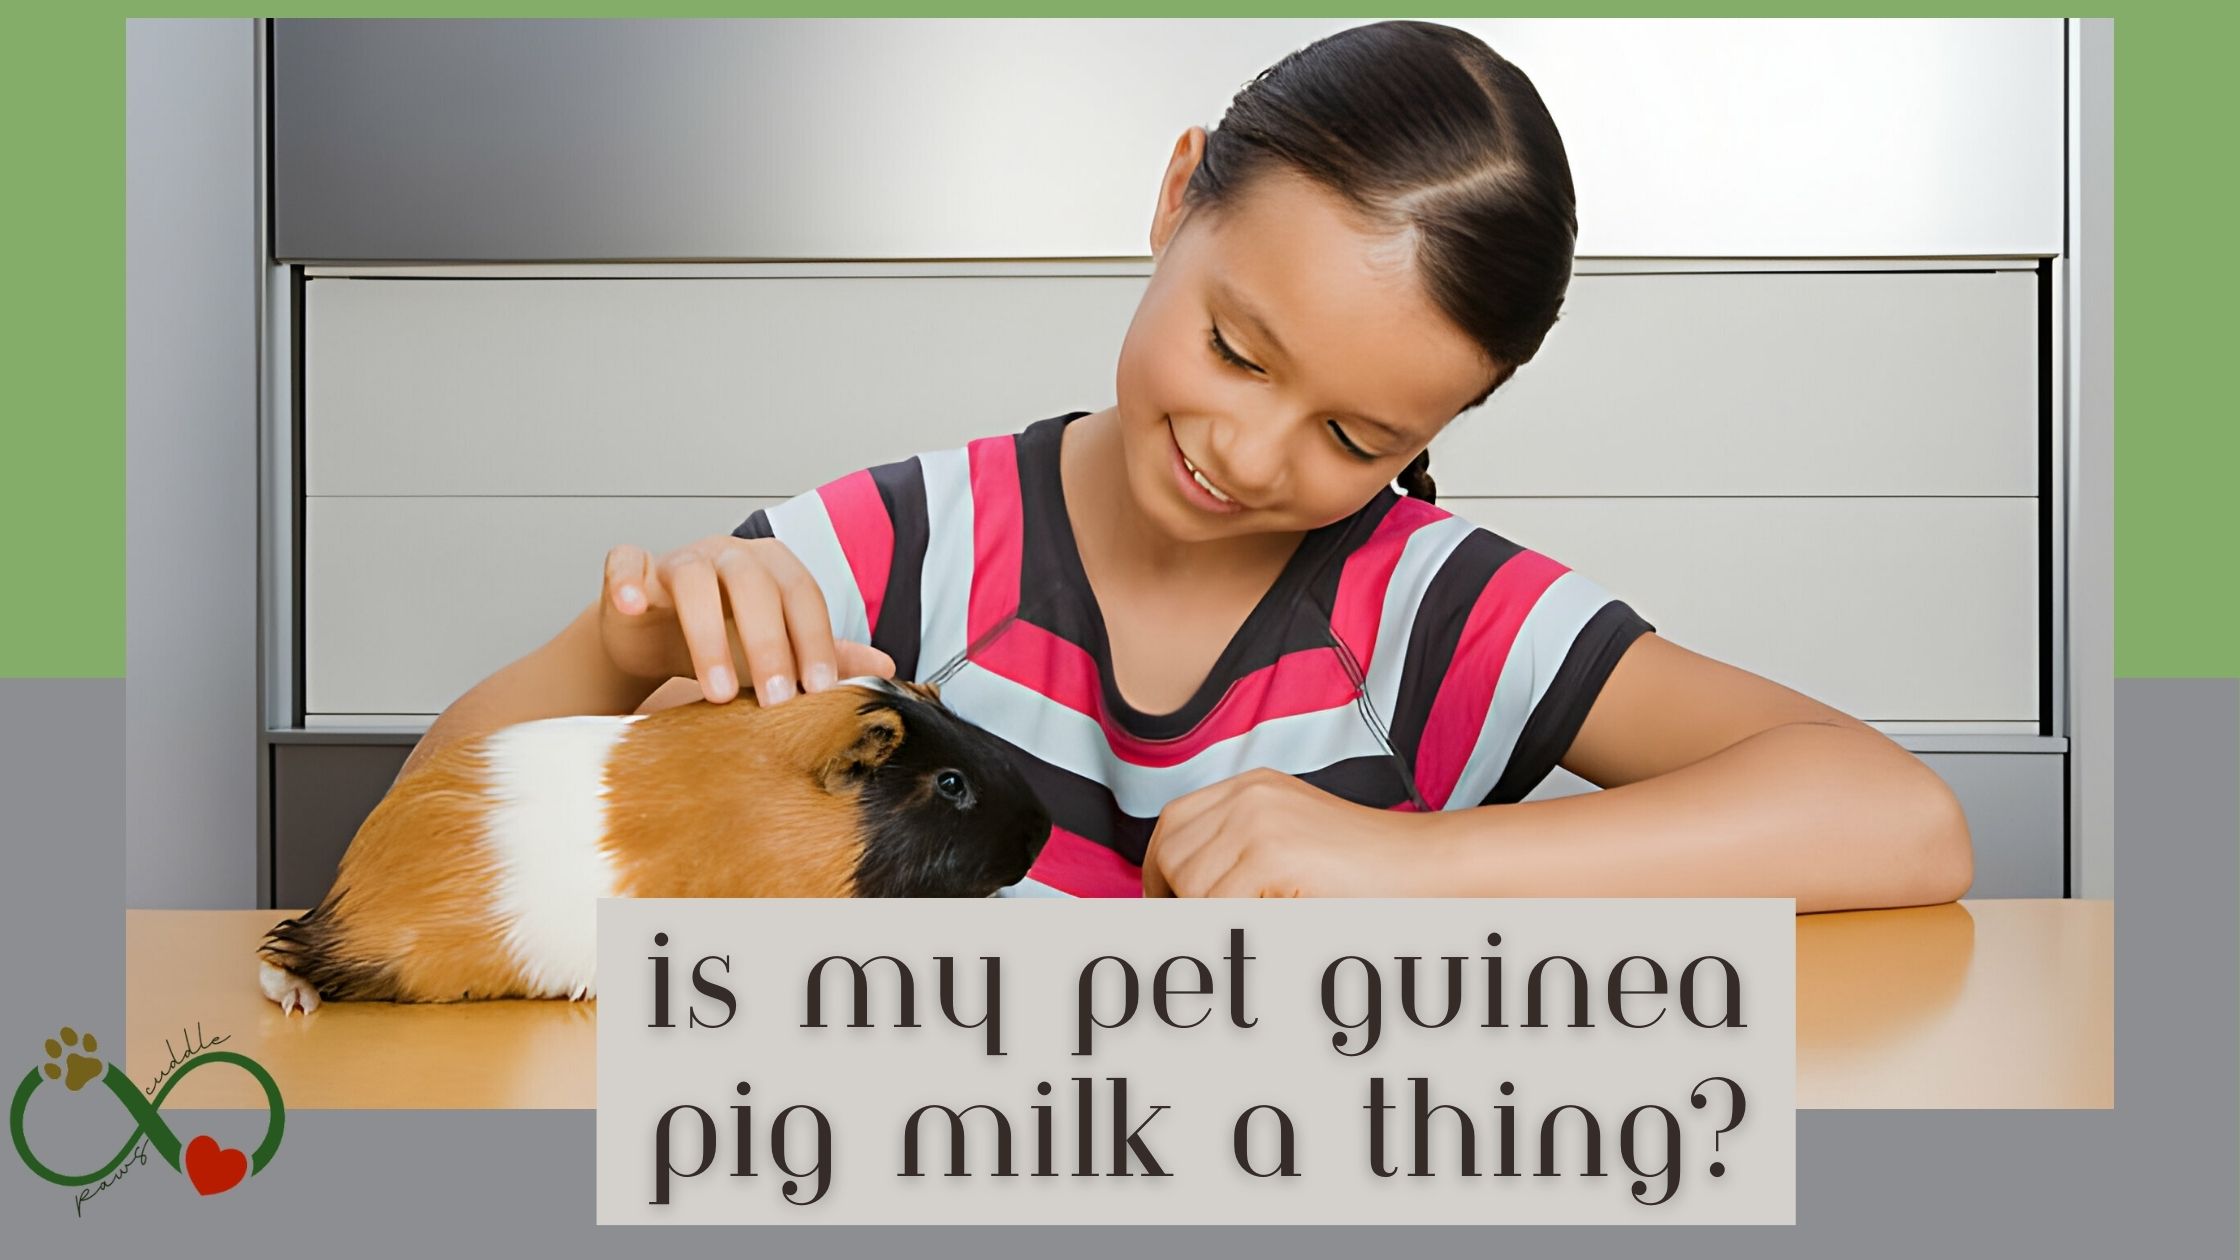 Is my pet guinea pig milk a thing?